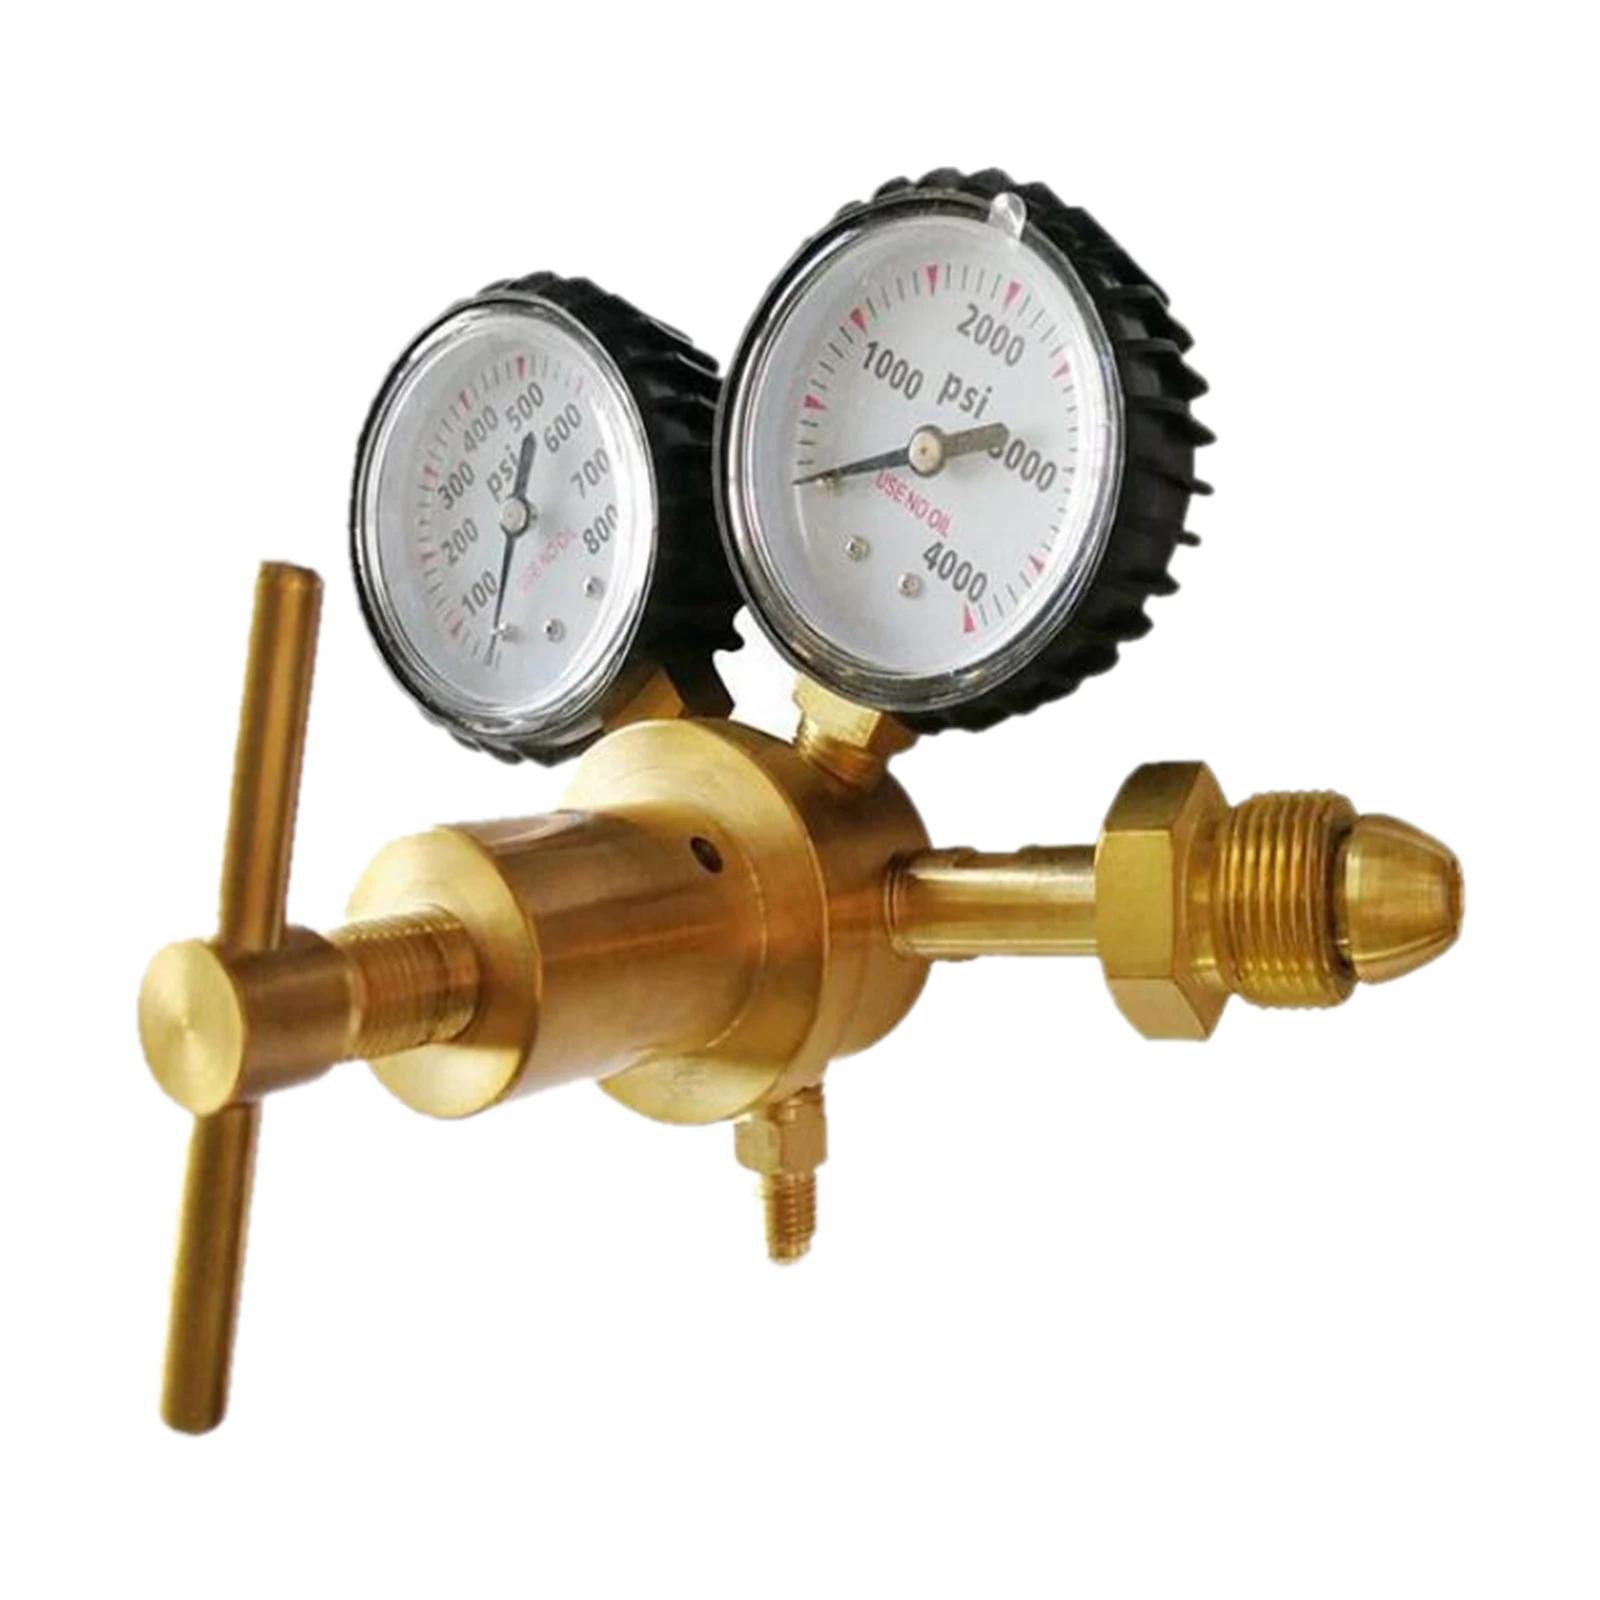 CGA580 Inlet Connection Nitrogen Regulator with 0-800 PSI Delivery Pressure